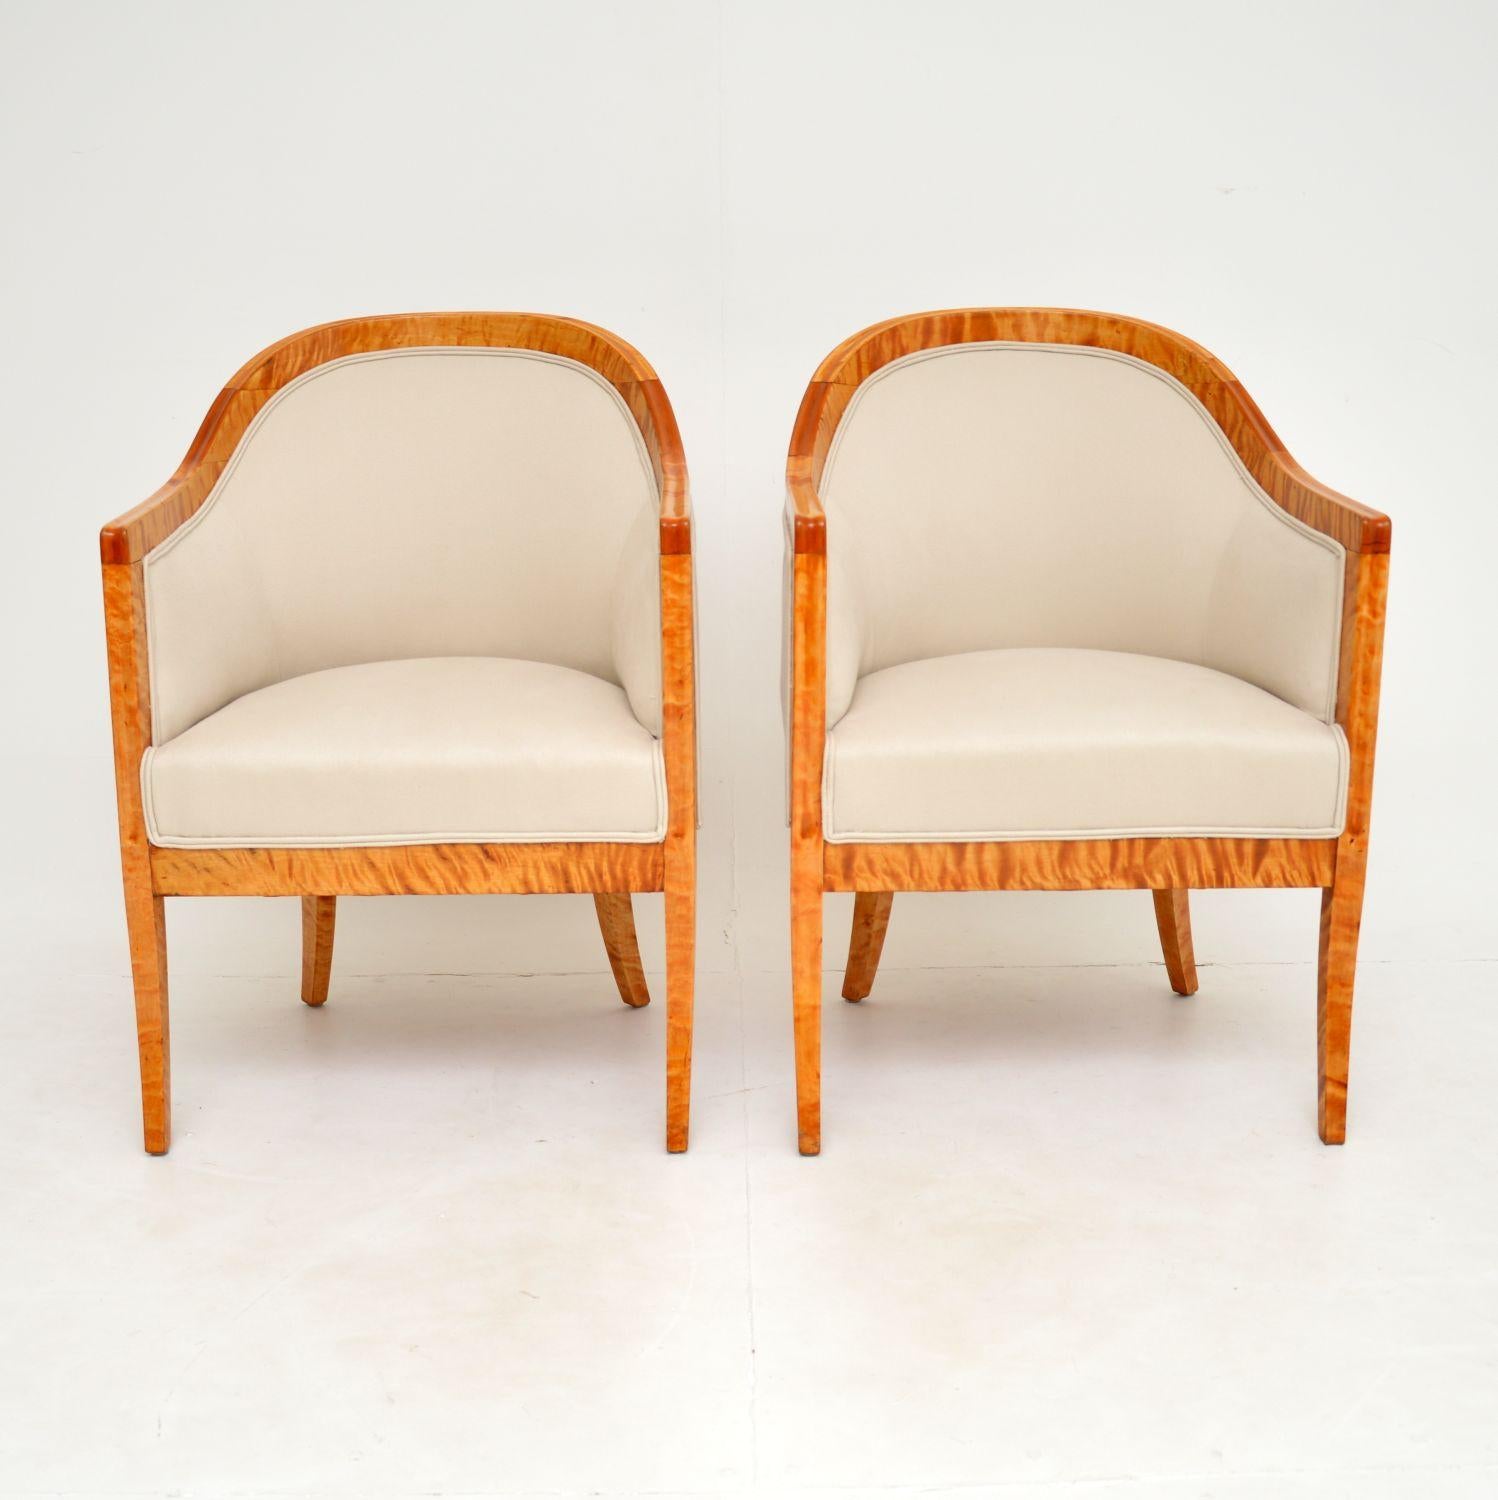 A superb pair of antique Swedish Biedermeier period armchairs in tiger birch, dating from around the 1840-1860’s.
They have a stunning design and are of amazing quality. The tiger birch wood frames have an elegant shape with gorgeous grain patterns